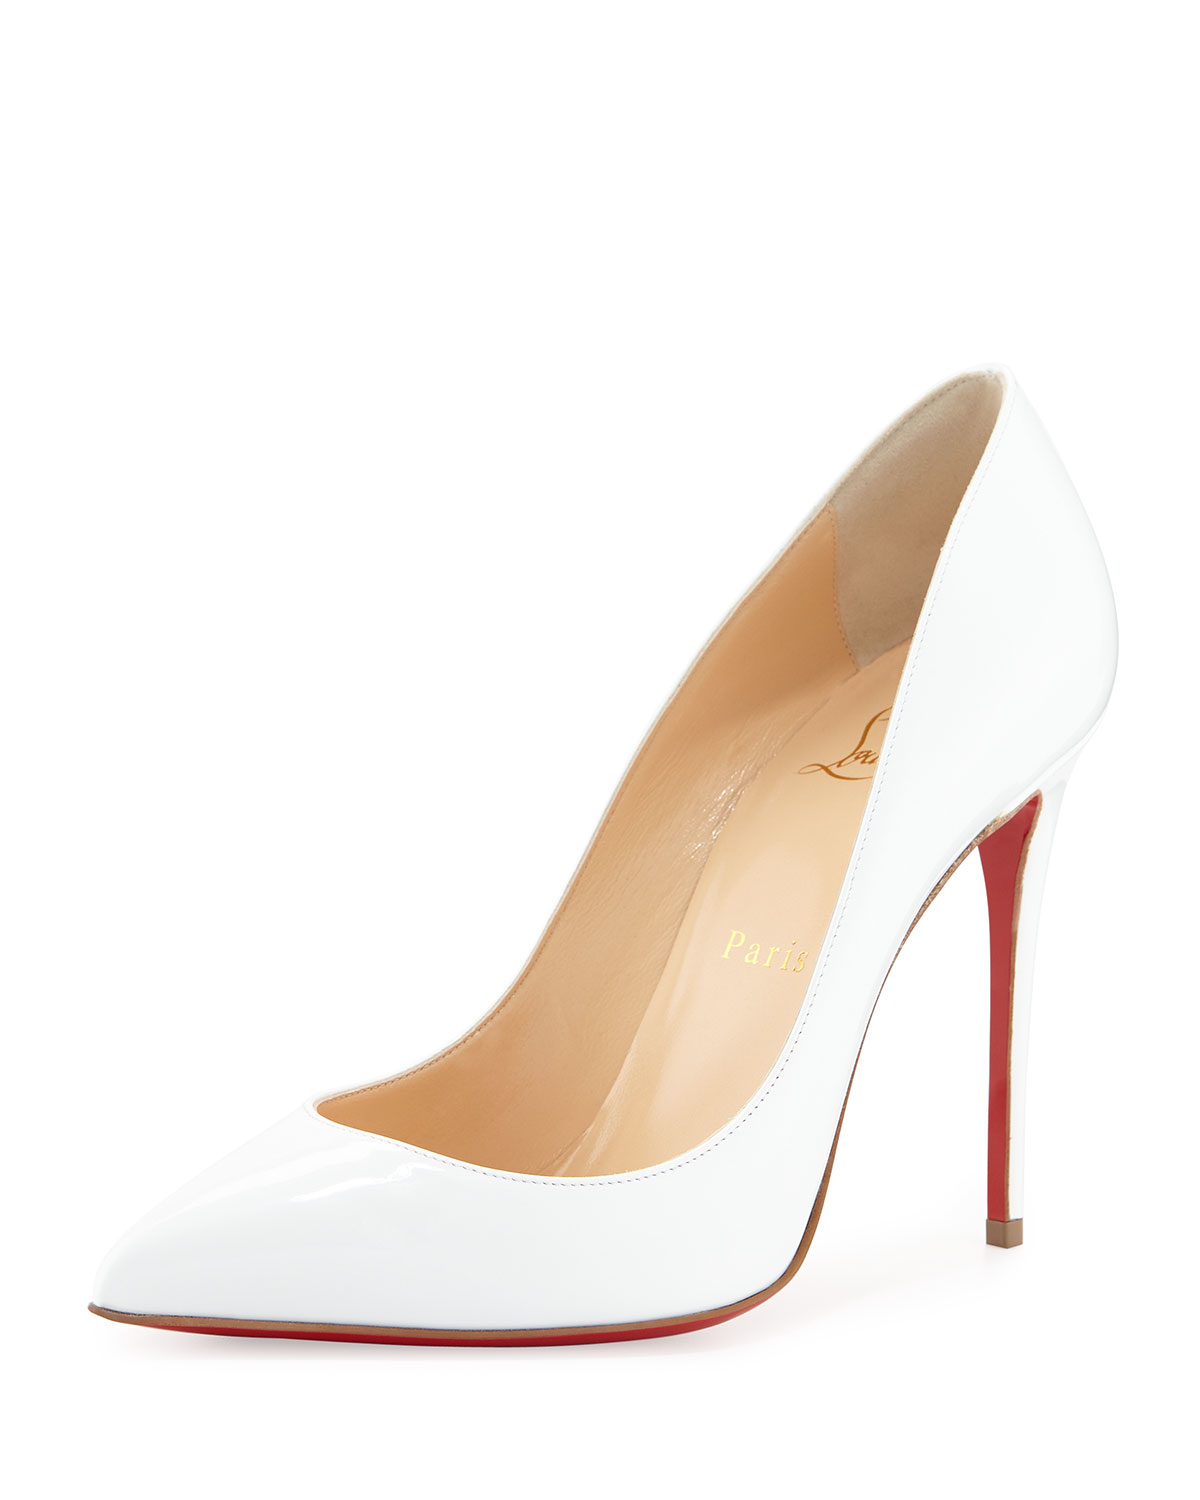 Christian louboutin Pigalle Follies Point-toe Red Sole Pump in ...